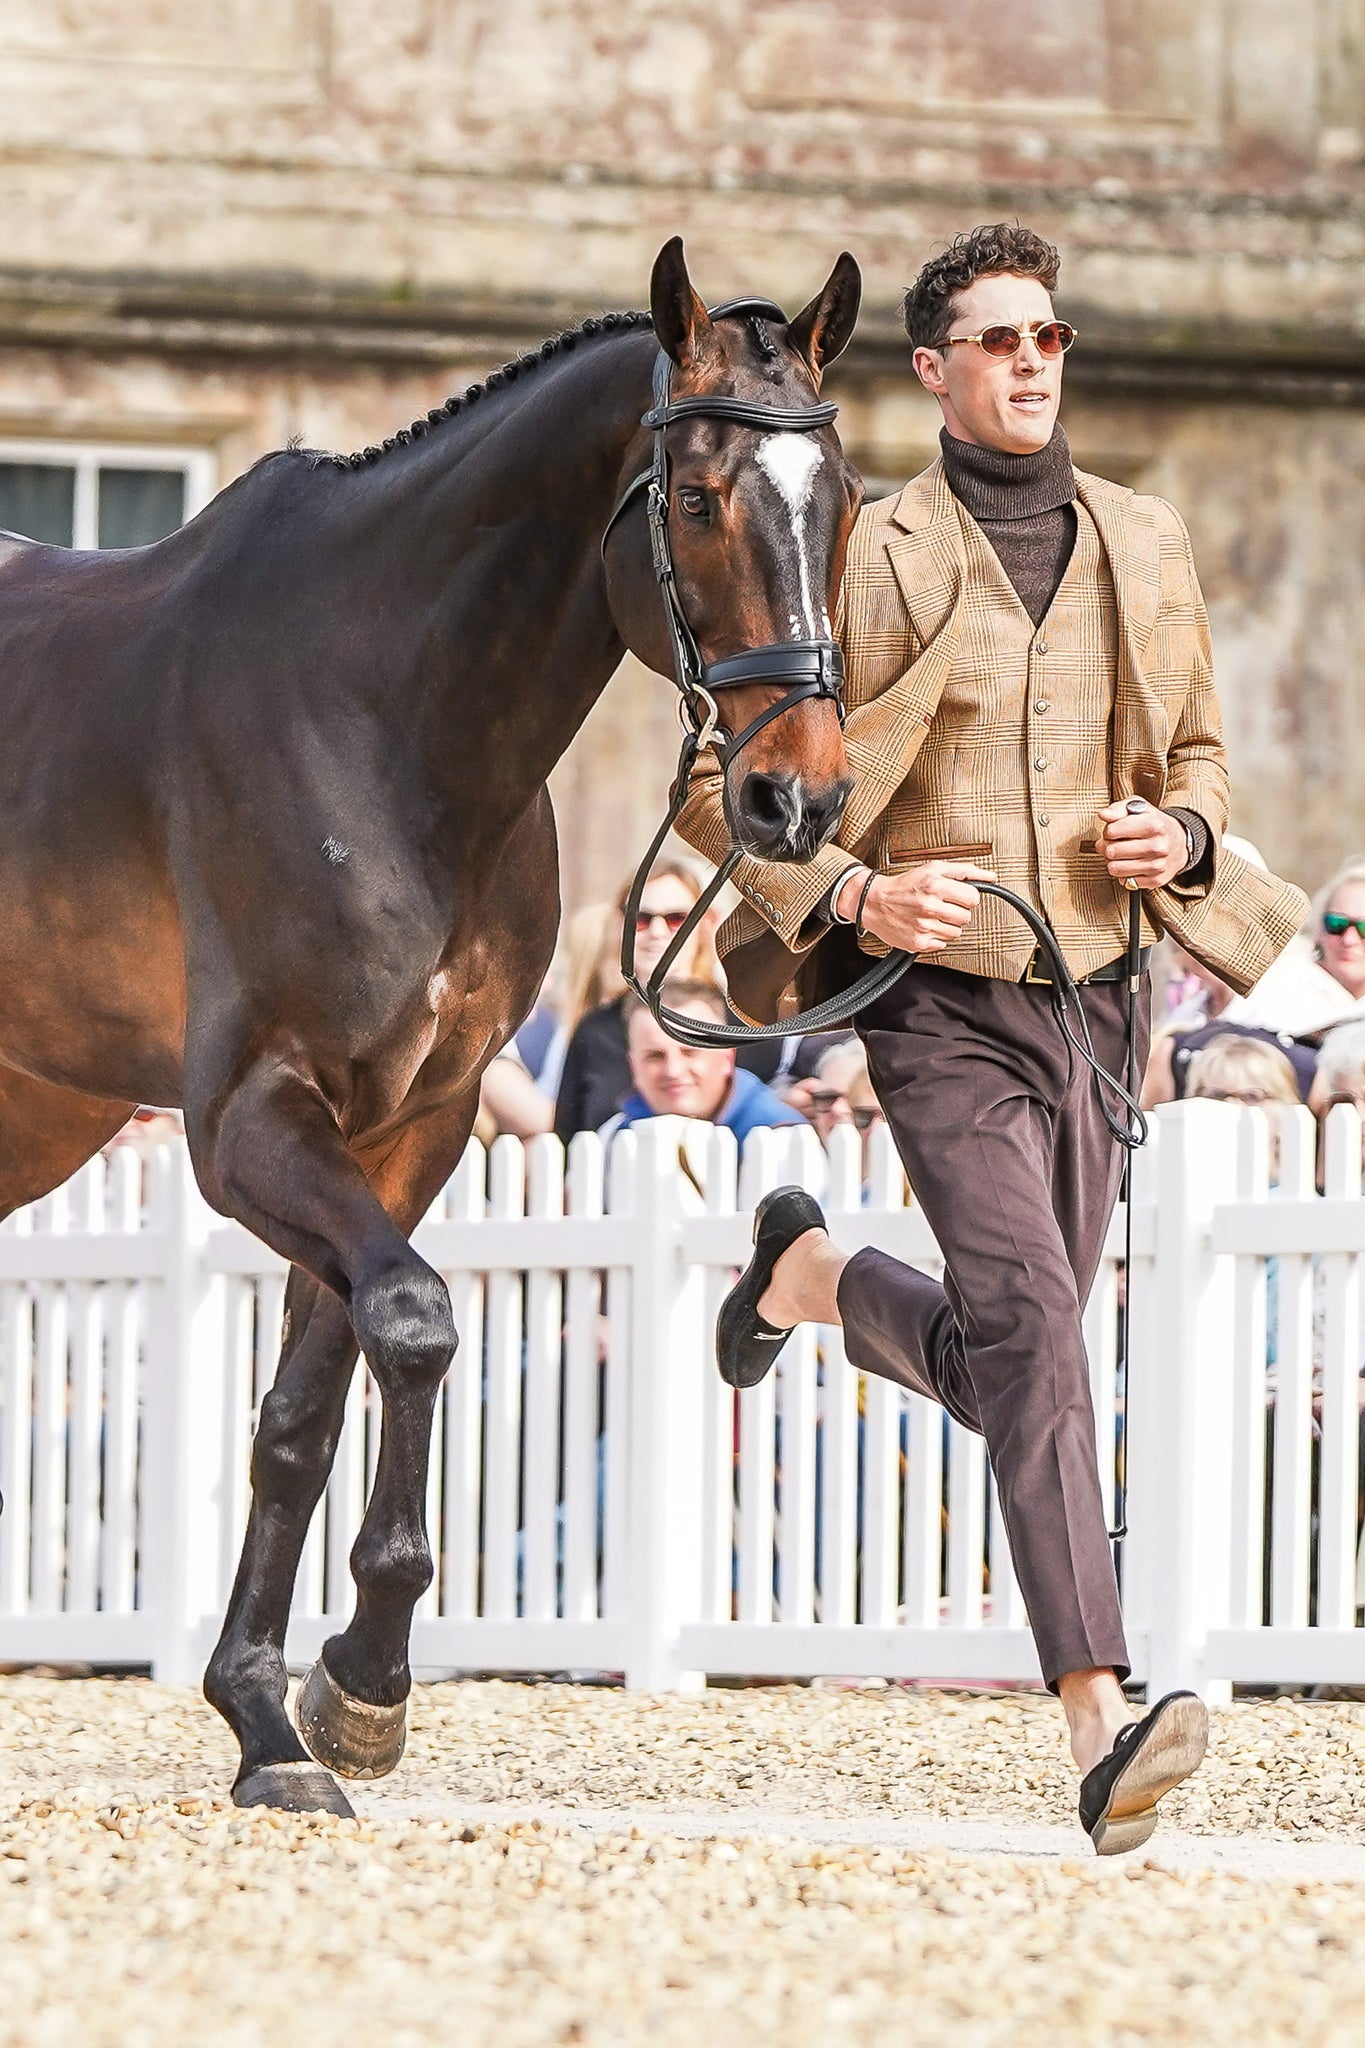 Will Rawlin's Trot Up Look One